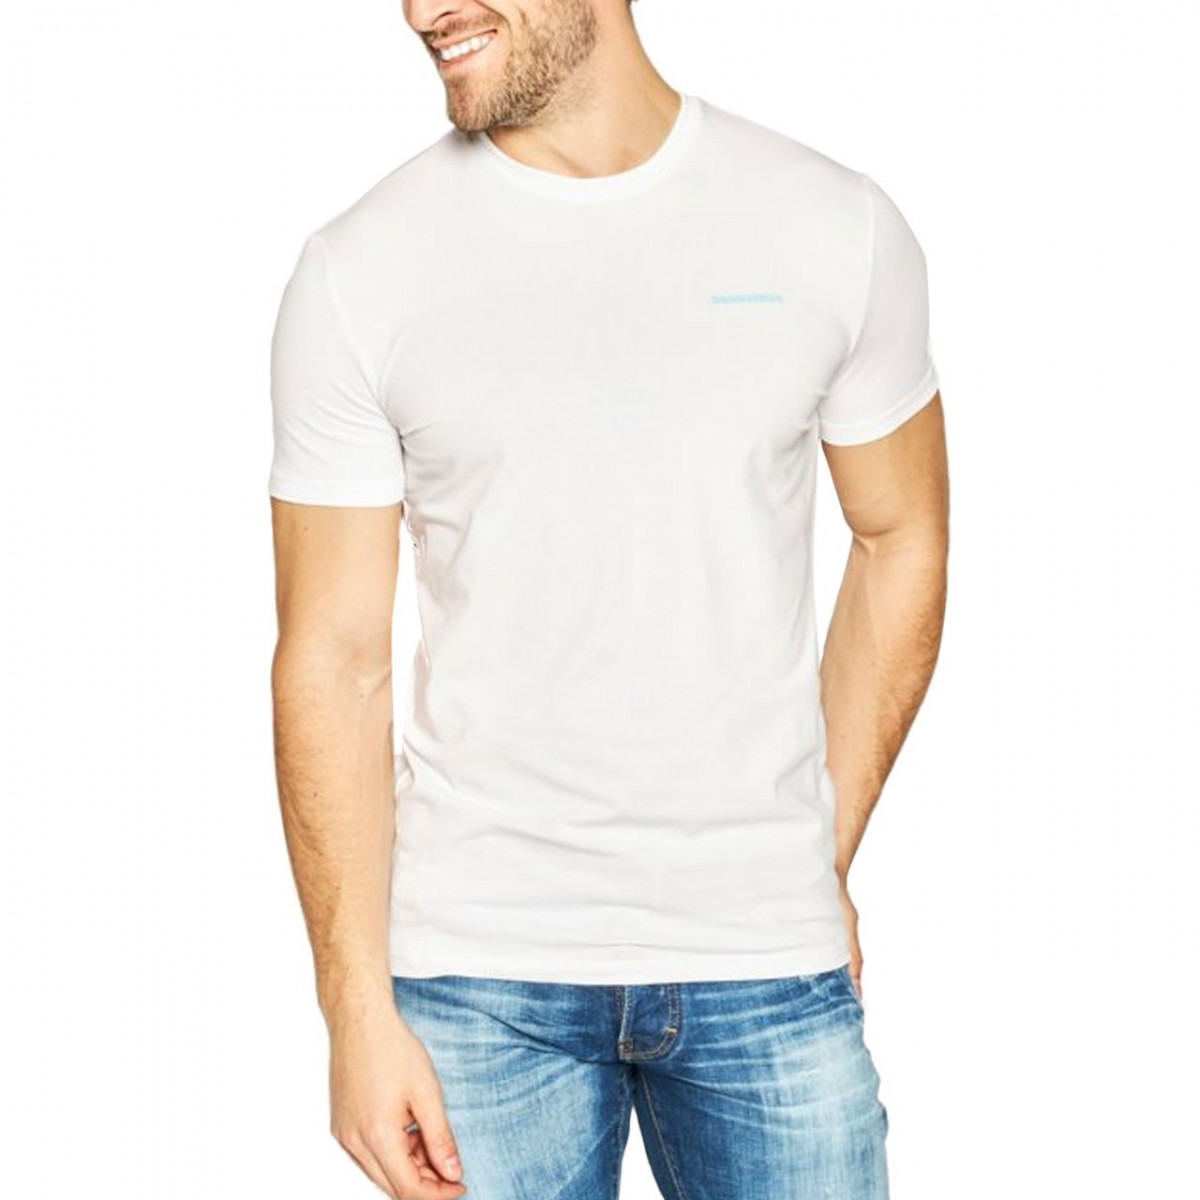 dsquared2 round neck t shirt grey